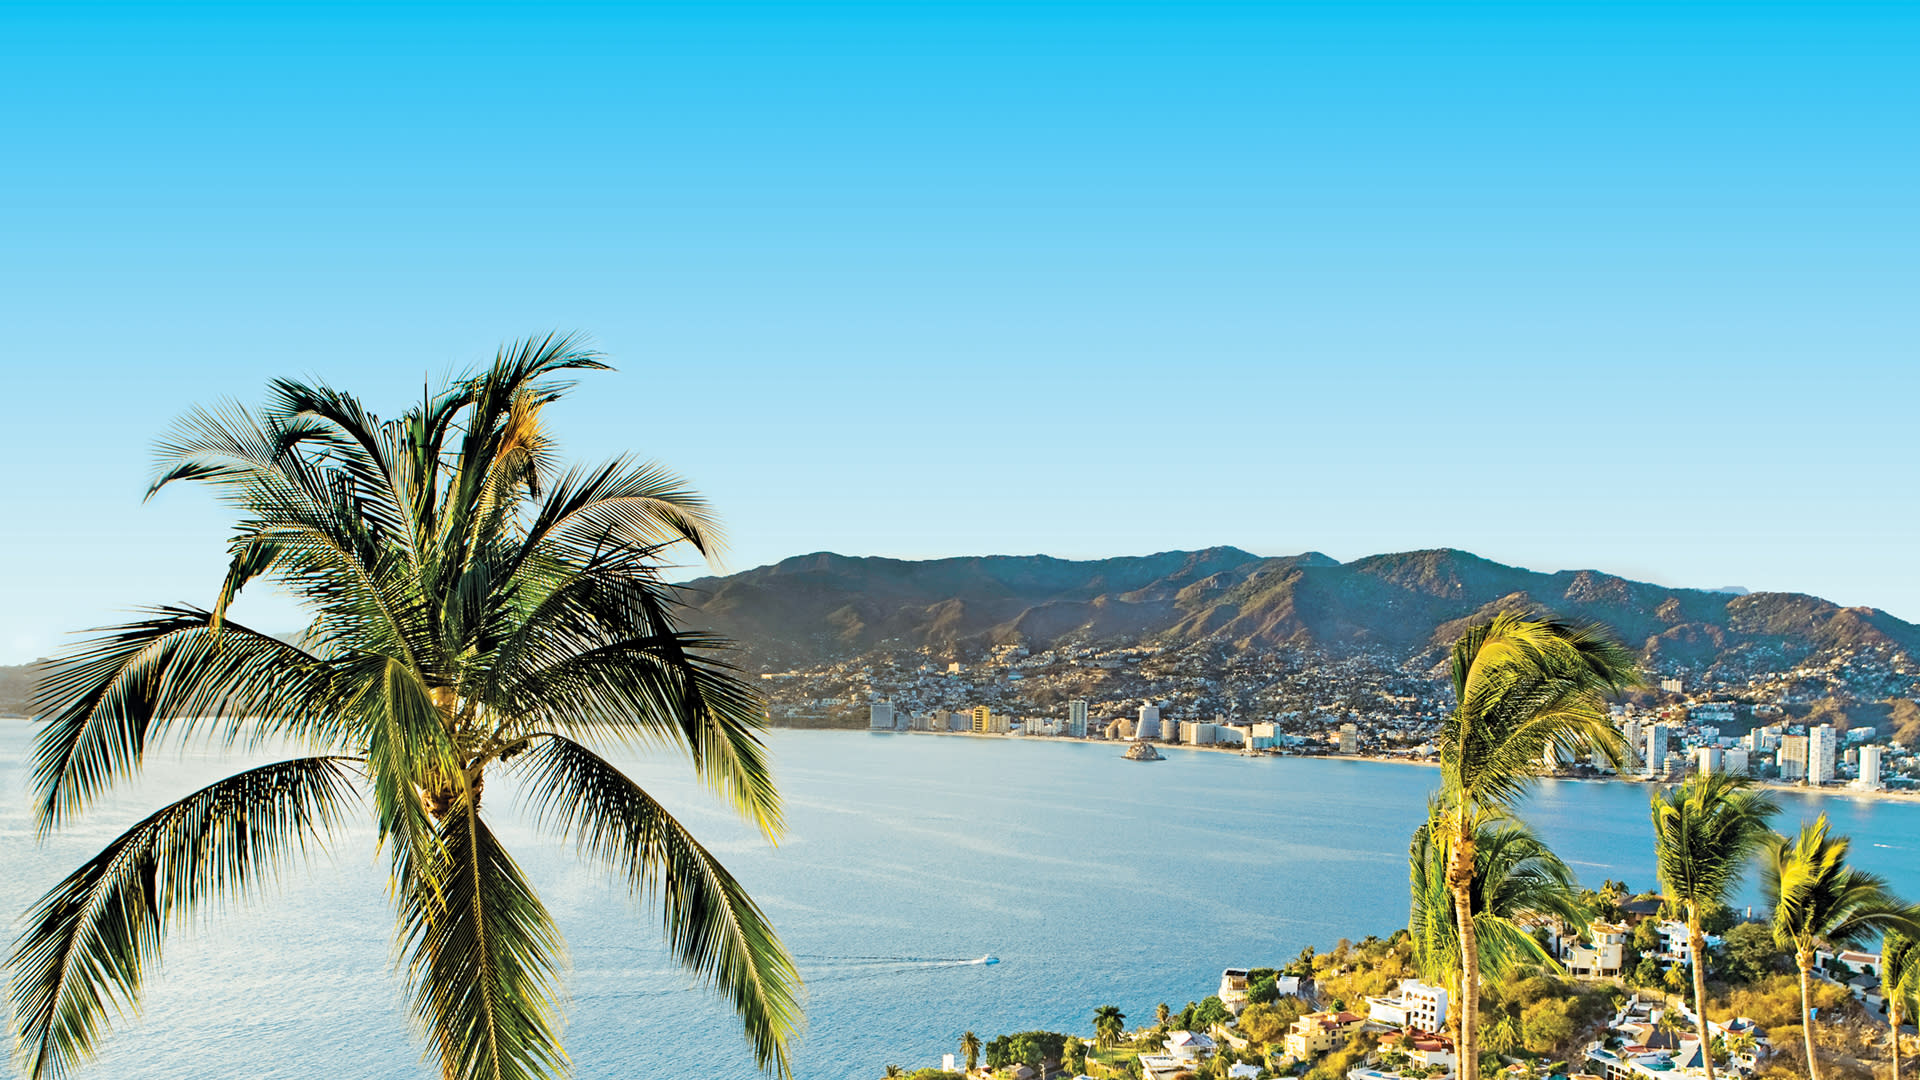 Acapulco Vacation Travel Deals, Package Vacations, Hotels, Flights, Tours |  